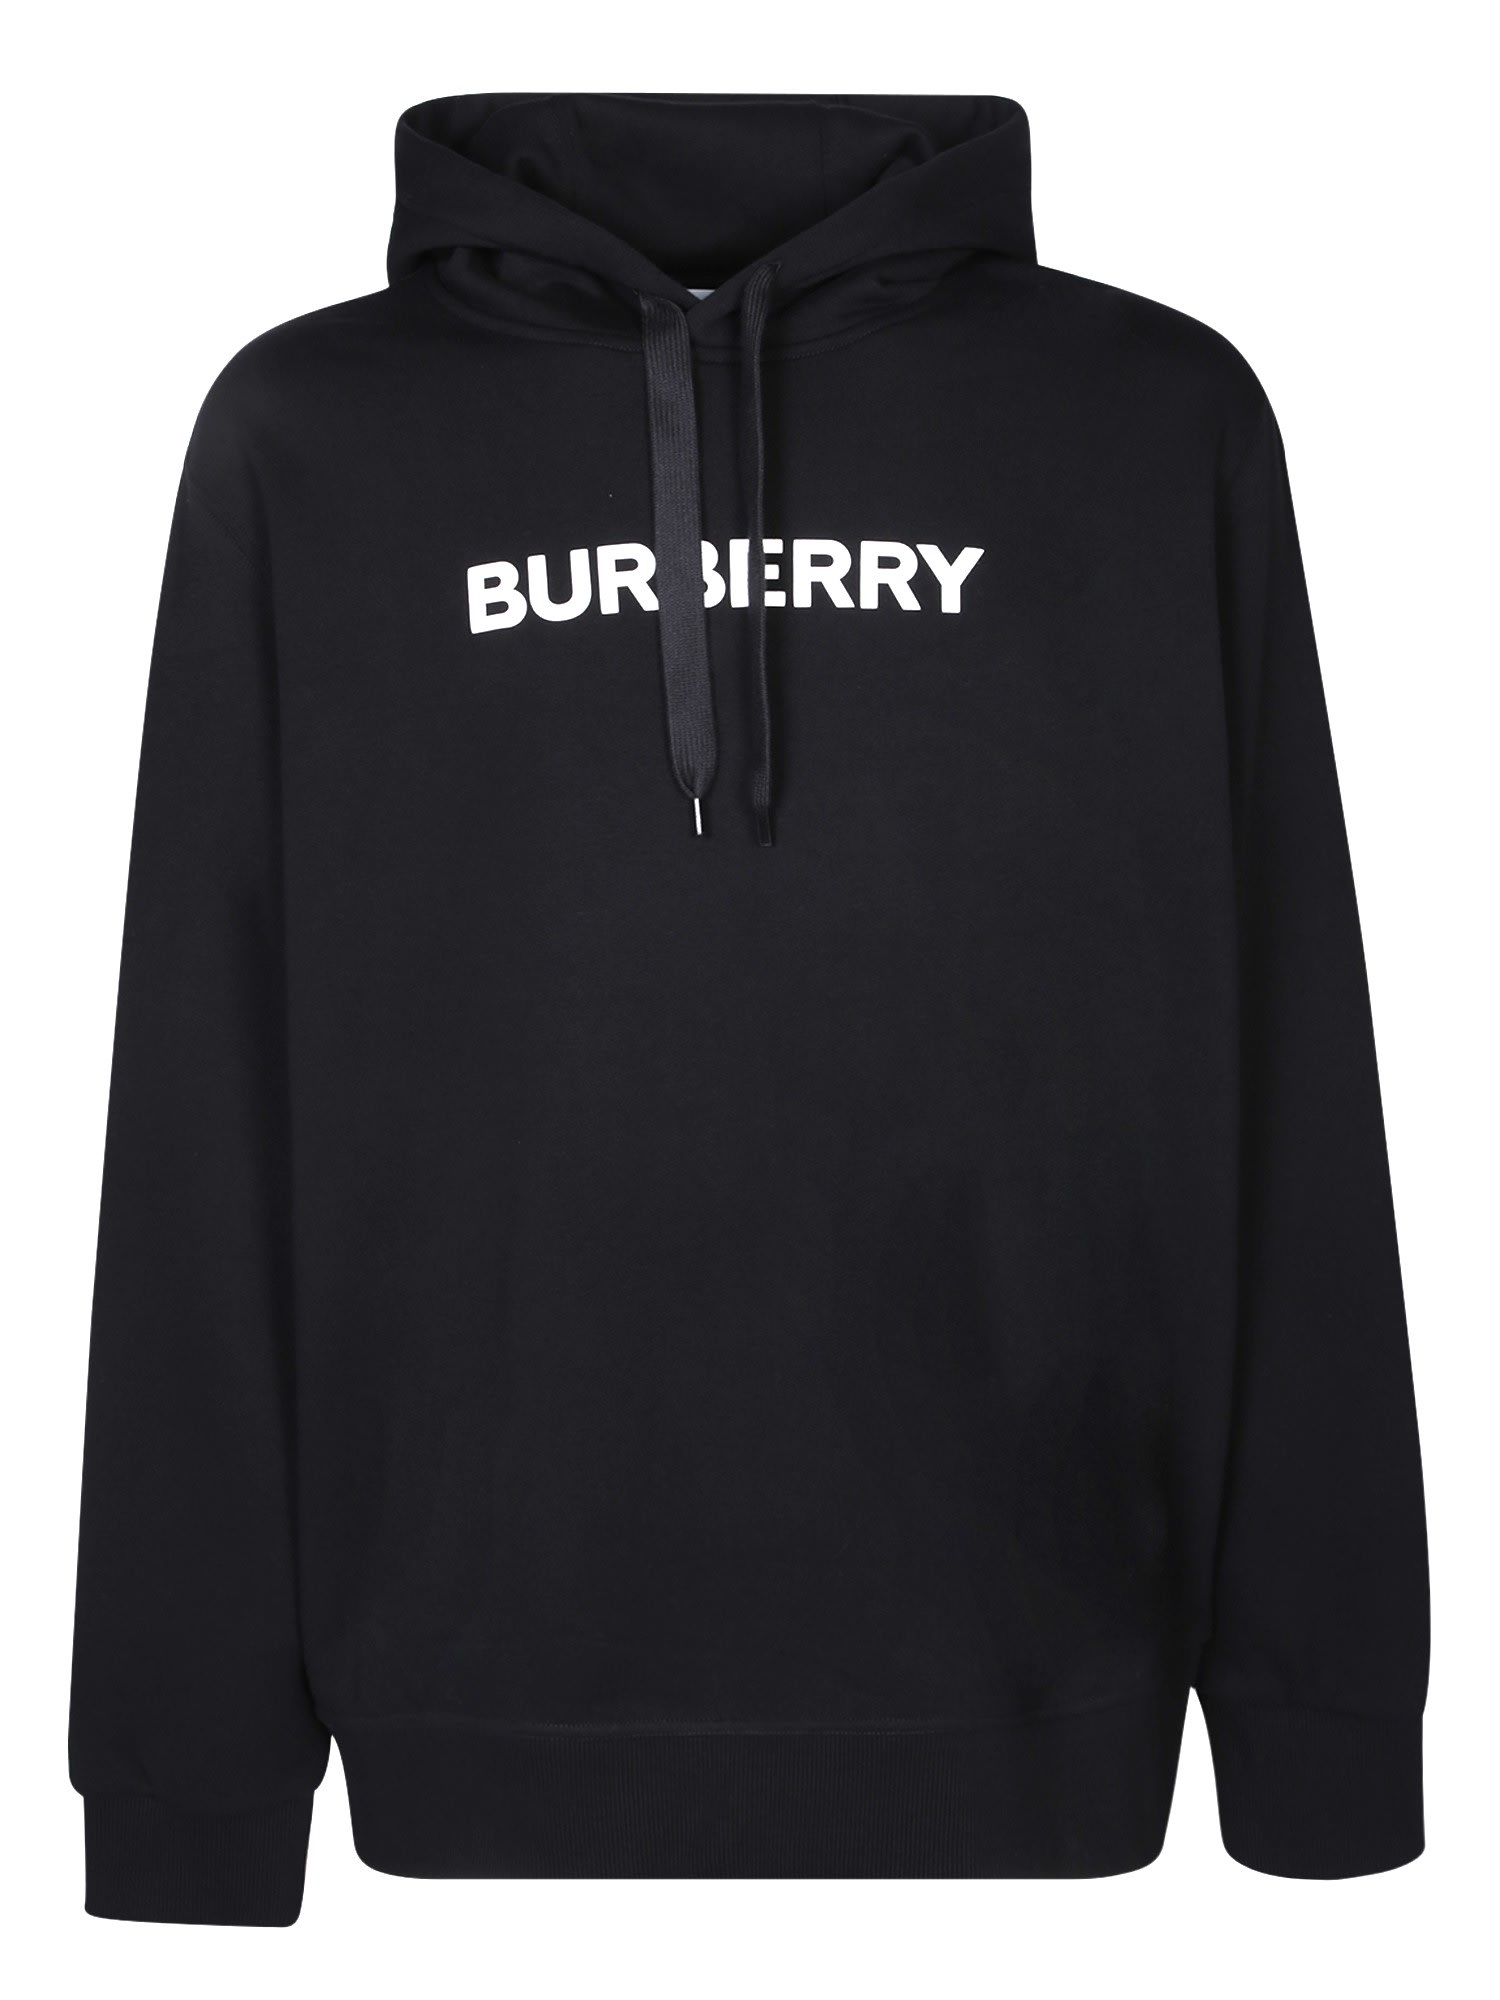 Burberry Ansdell Black Hoodie